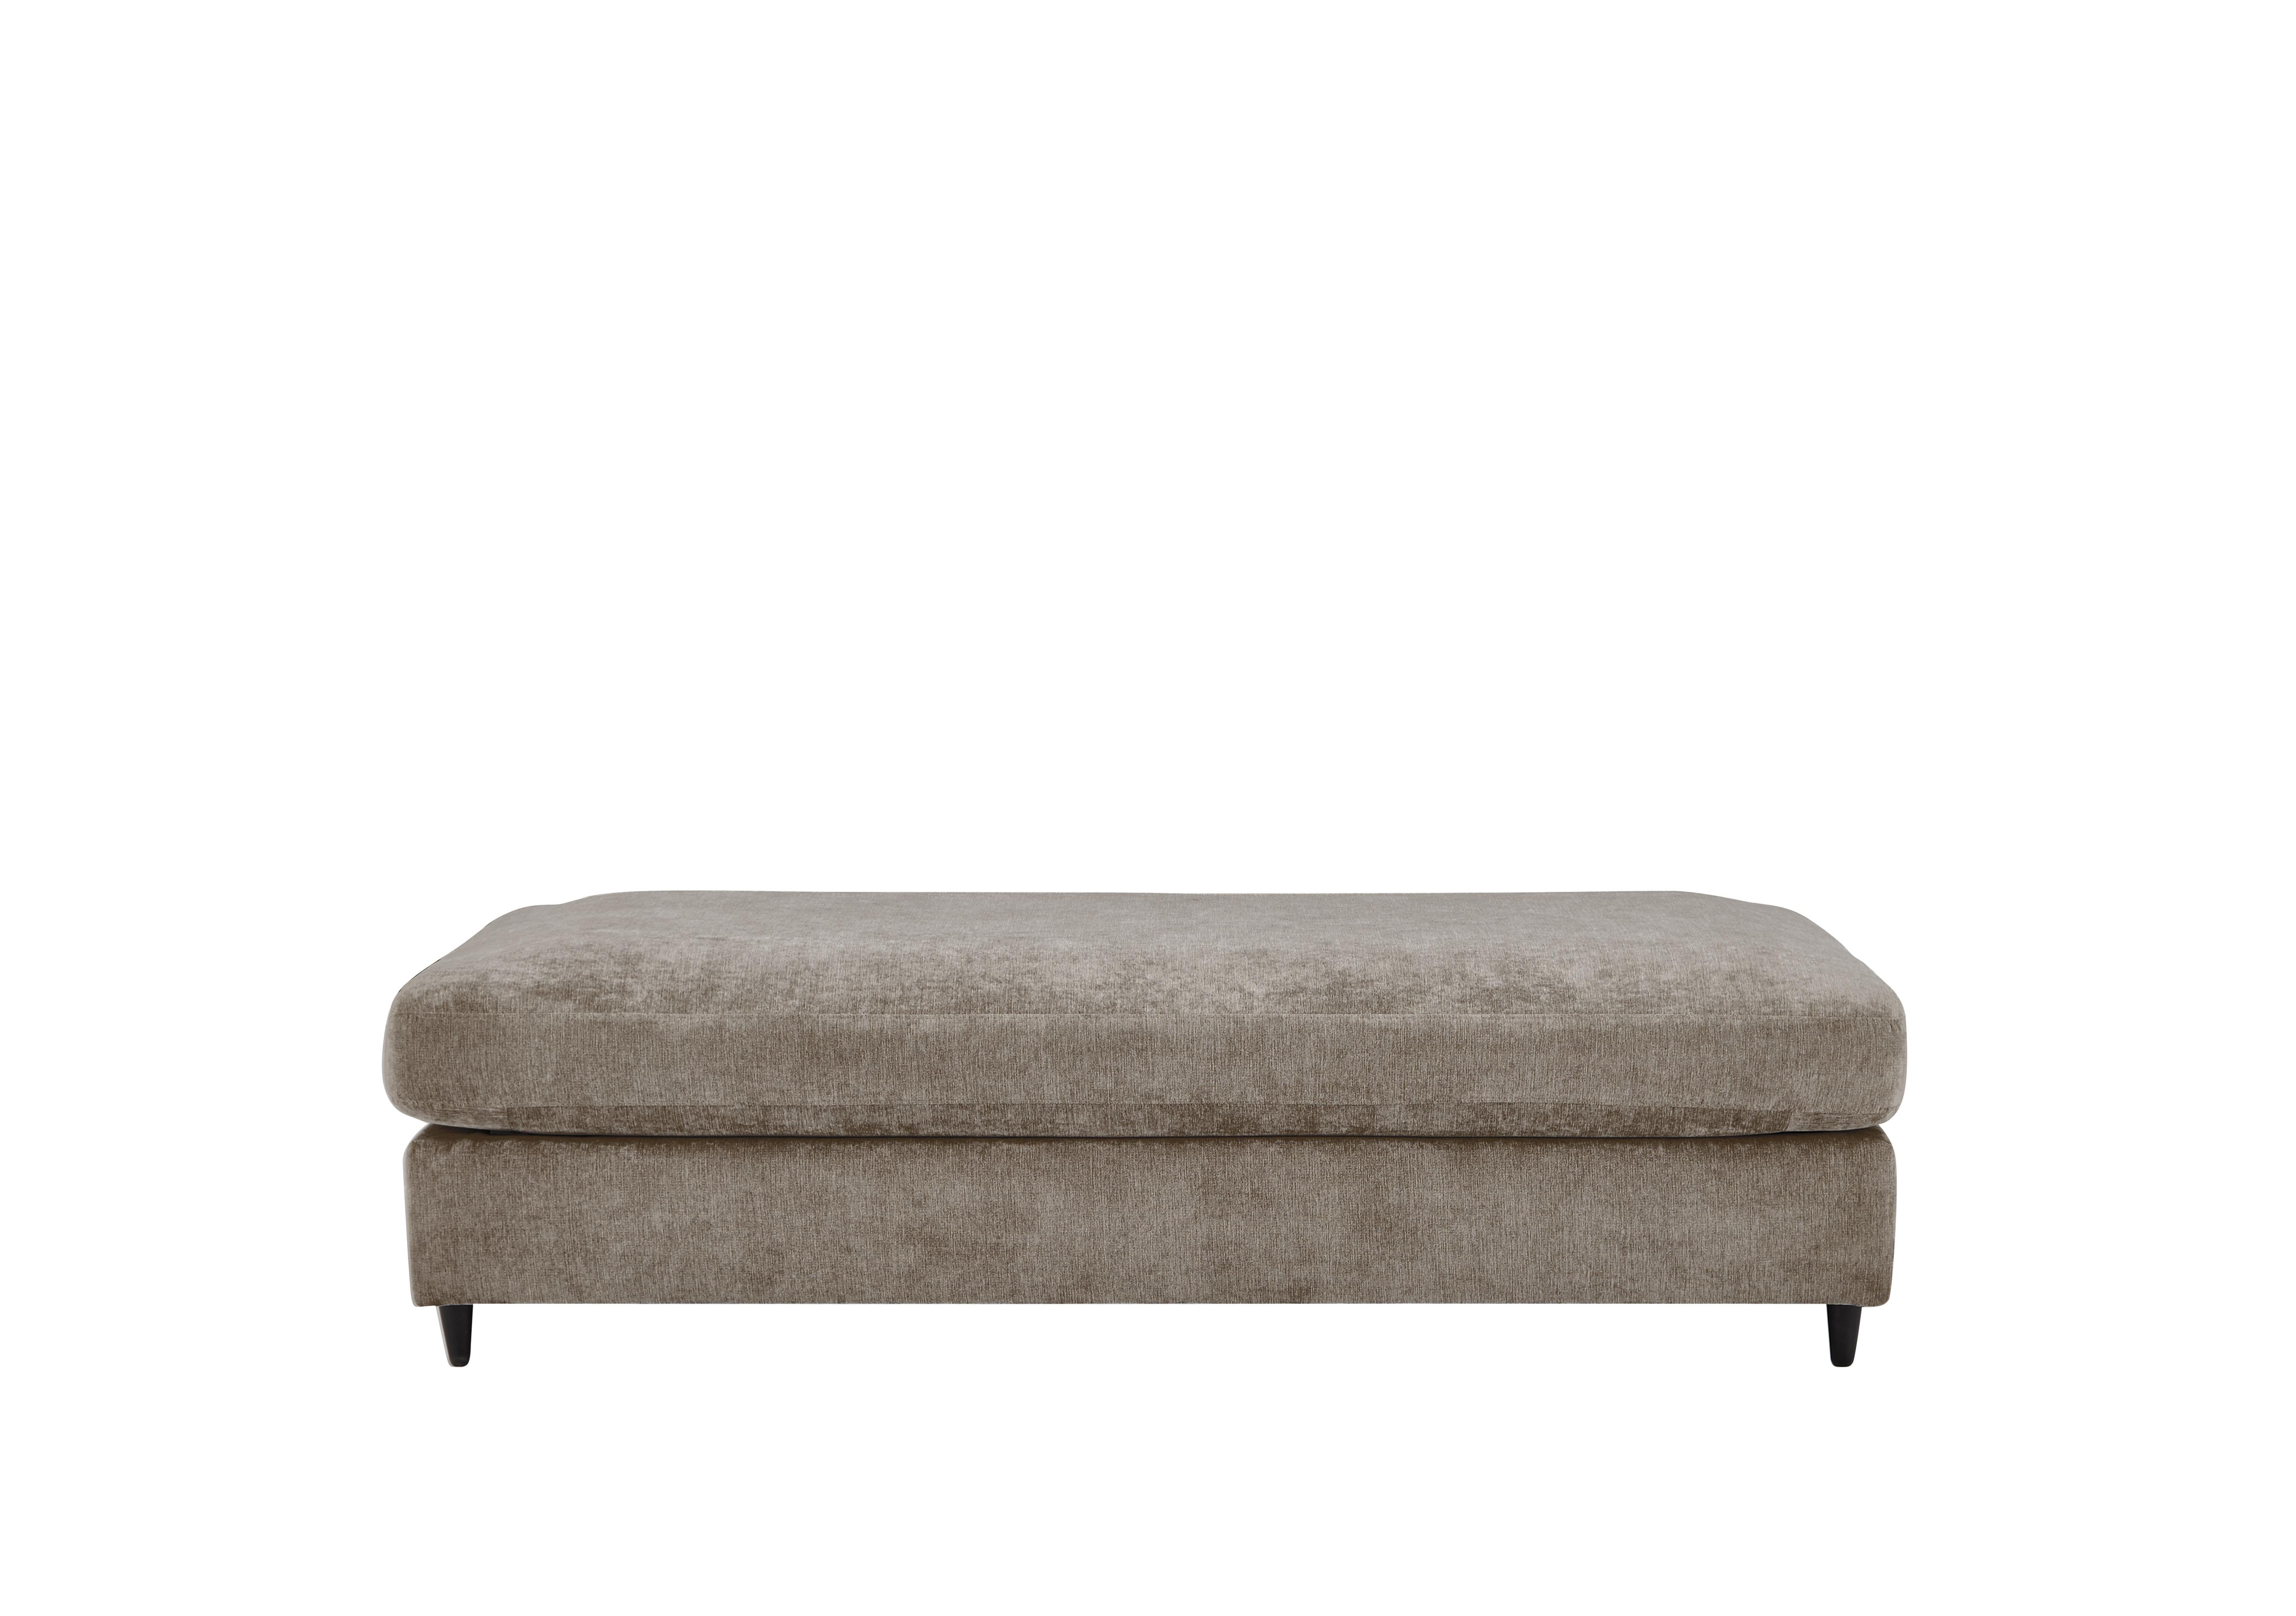 Esprit Large Fabric Stool Bed in Taupe Ebony Feet on Furniture Village